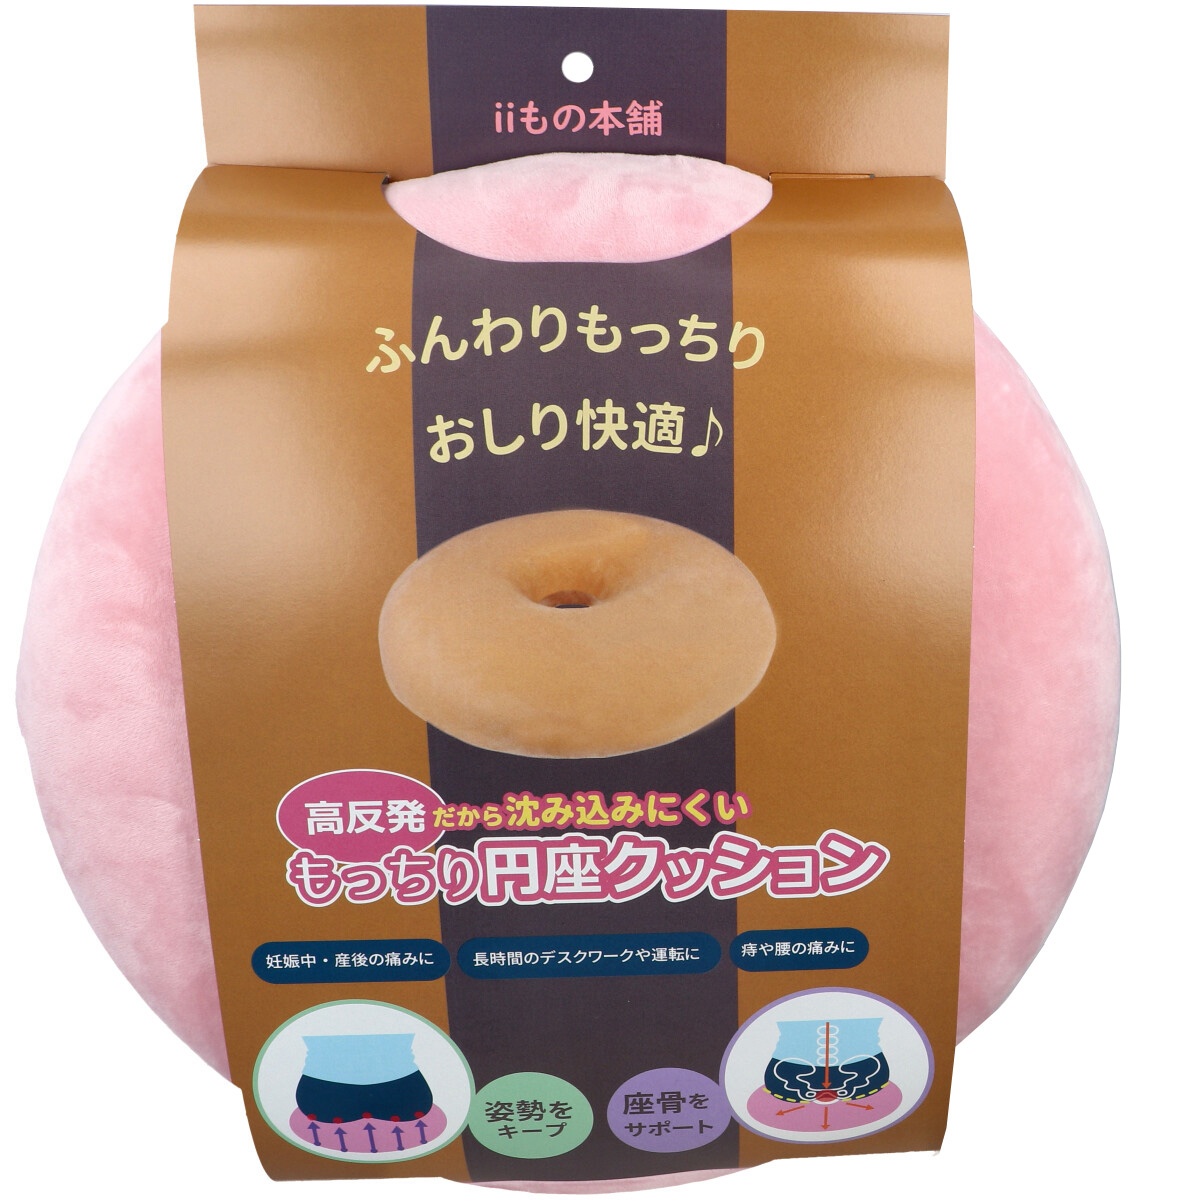 Picture of Pink color High Resilience Donut Cushion